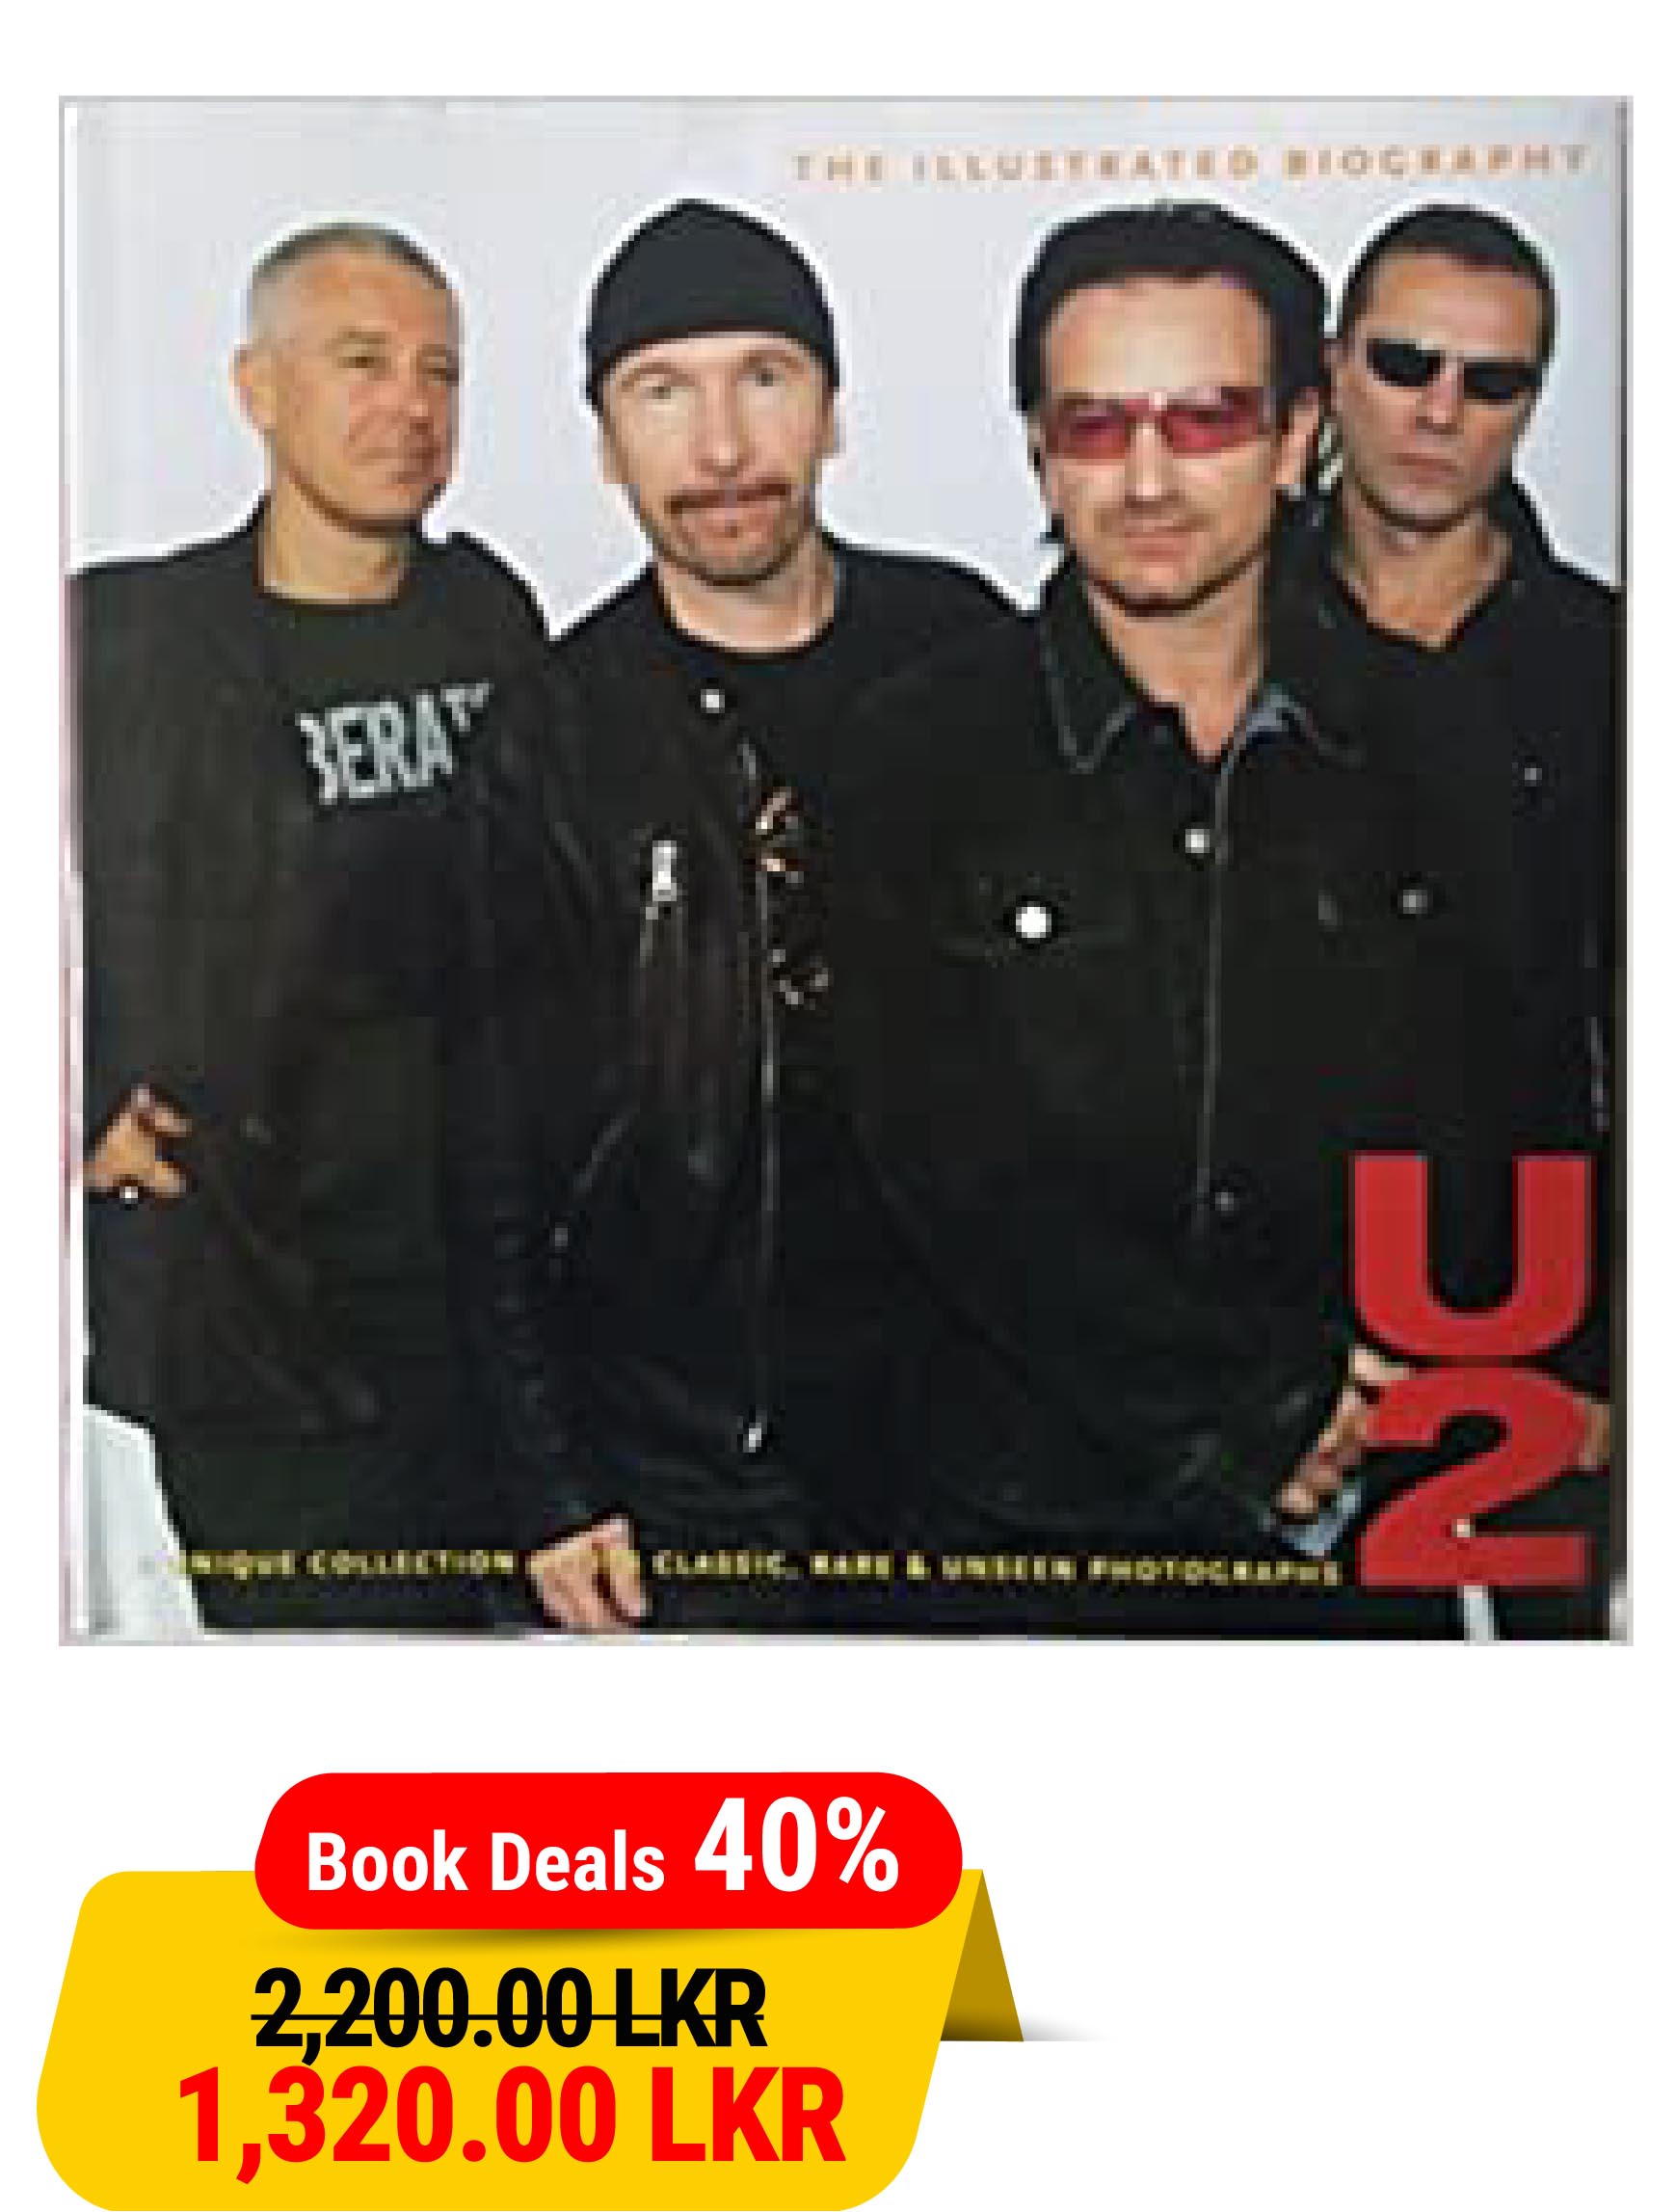 U2 The Illustrated Biography